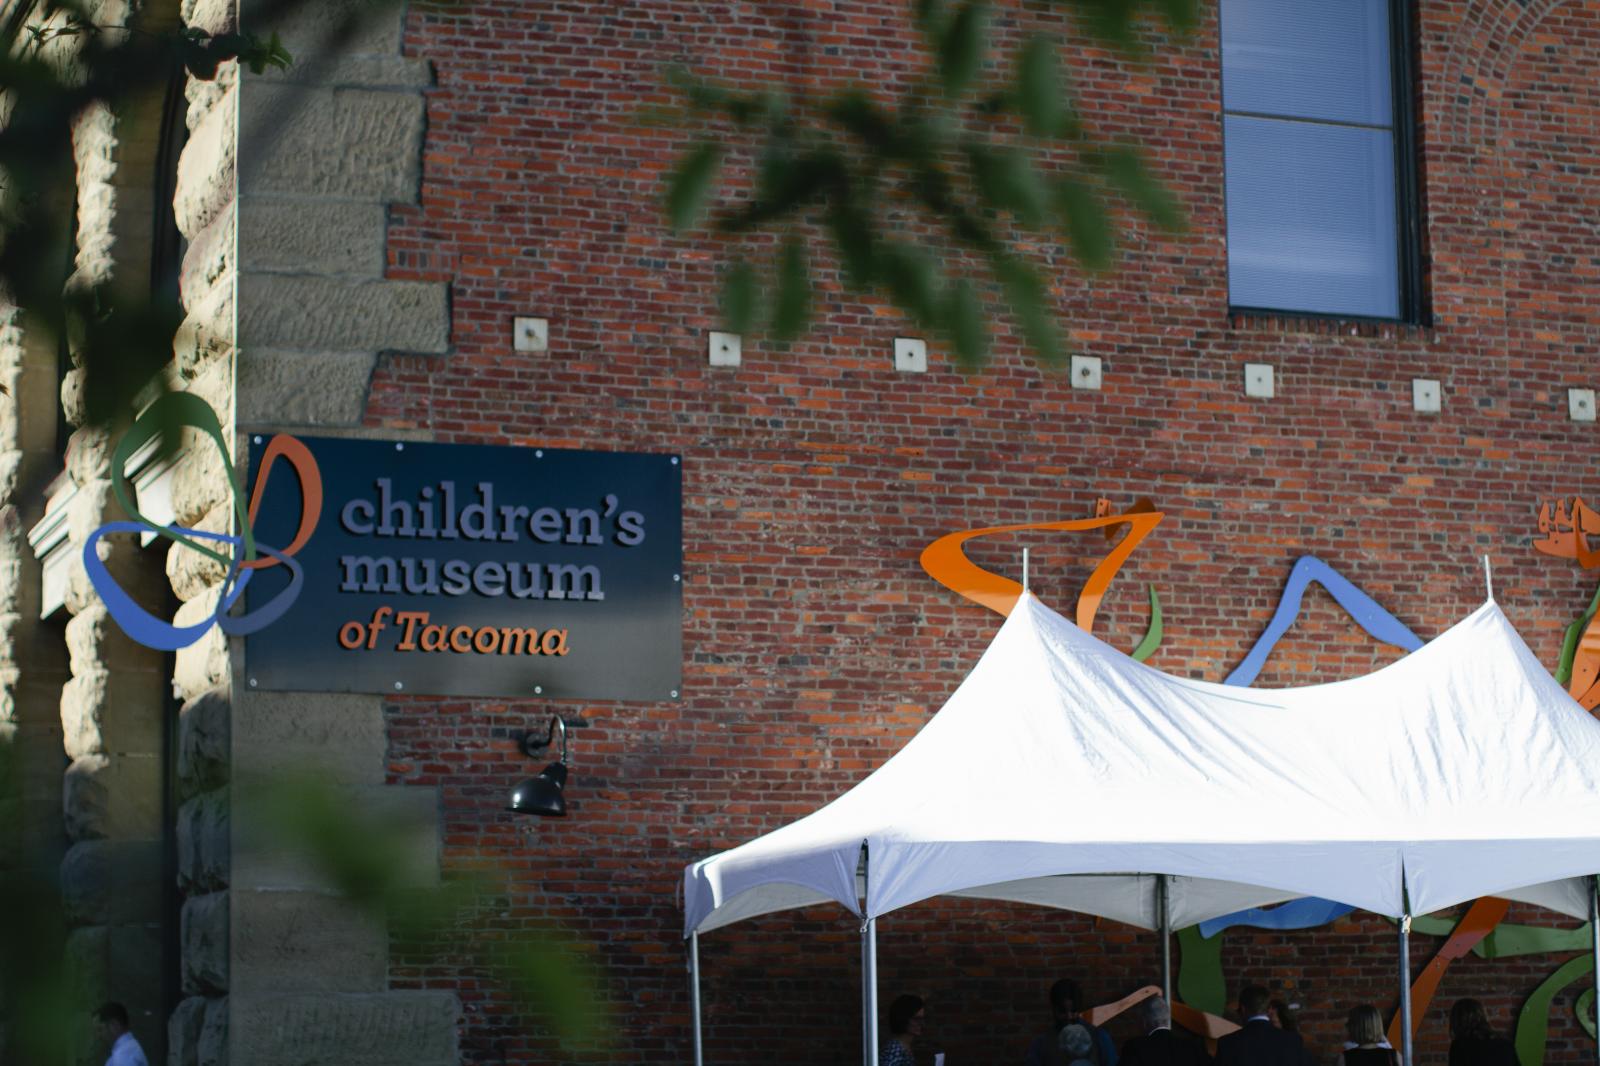 An exterior view of the entrance of the Tacoma Children